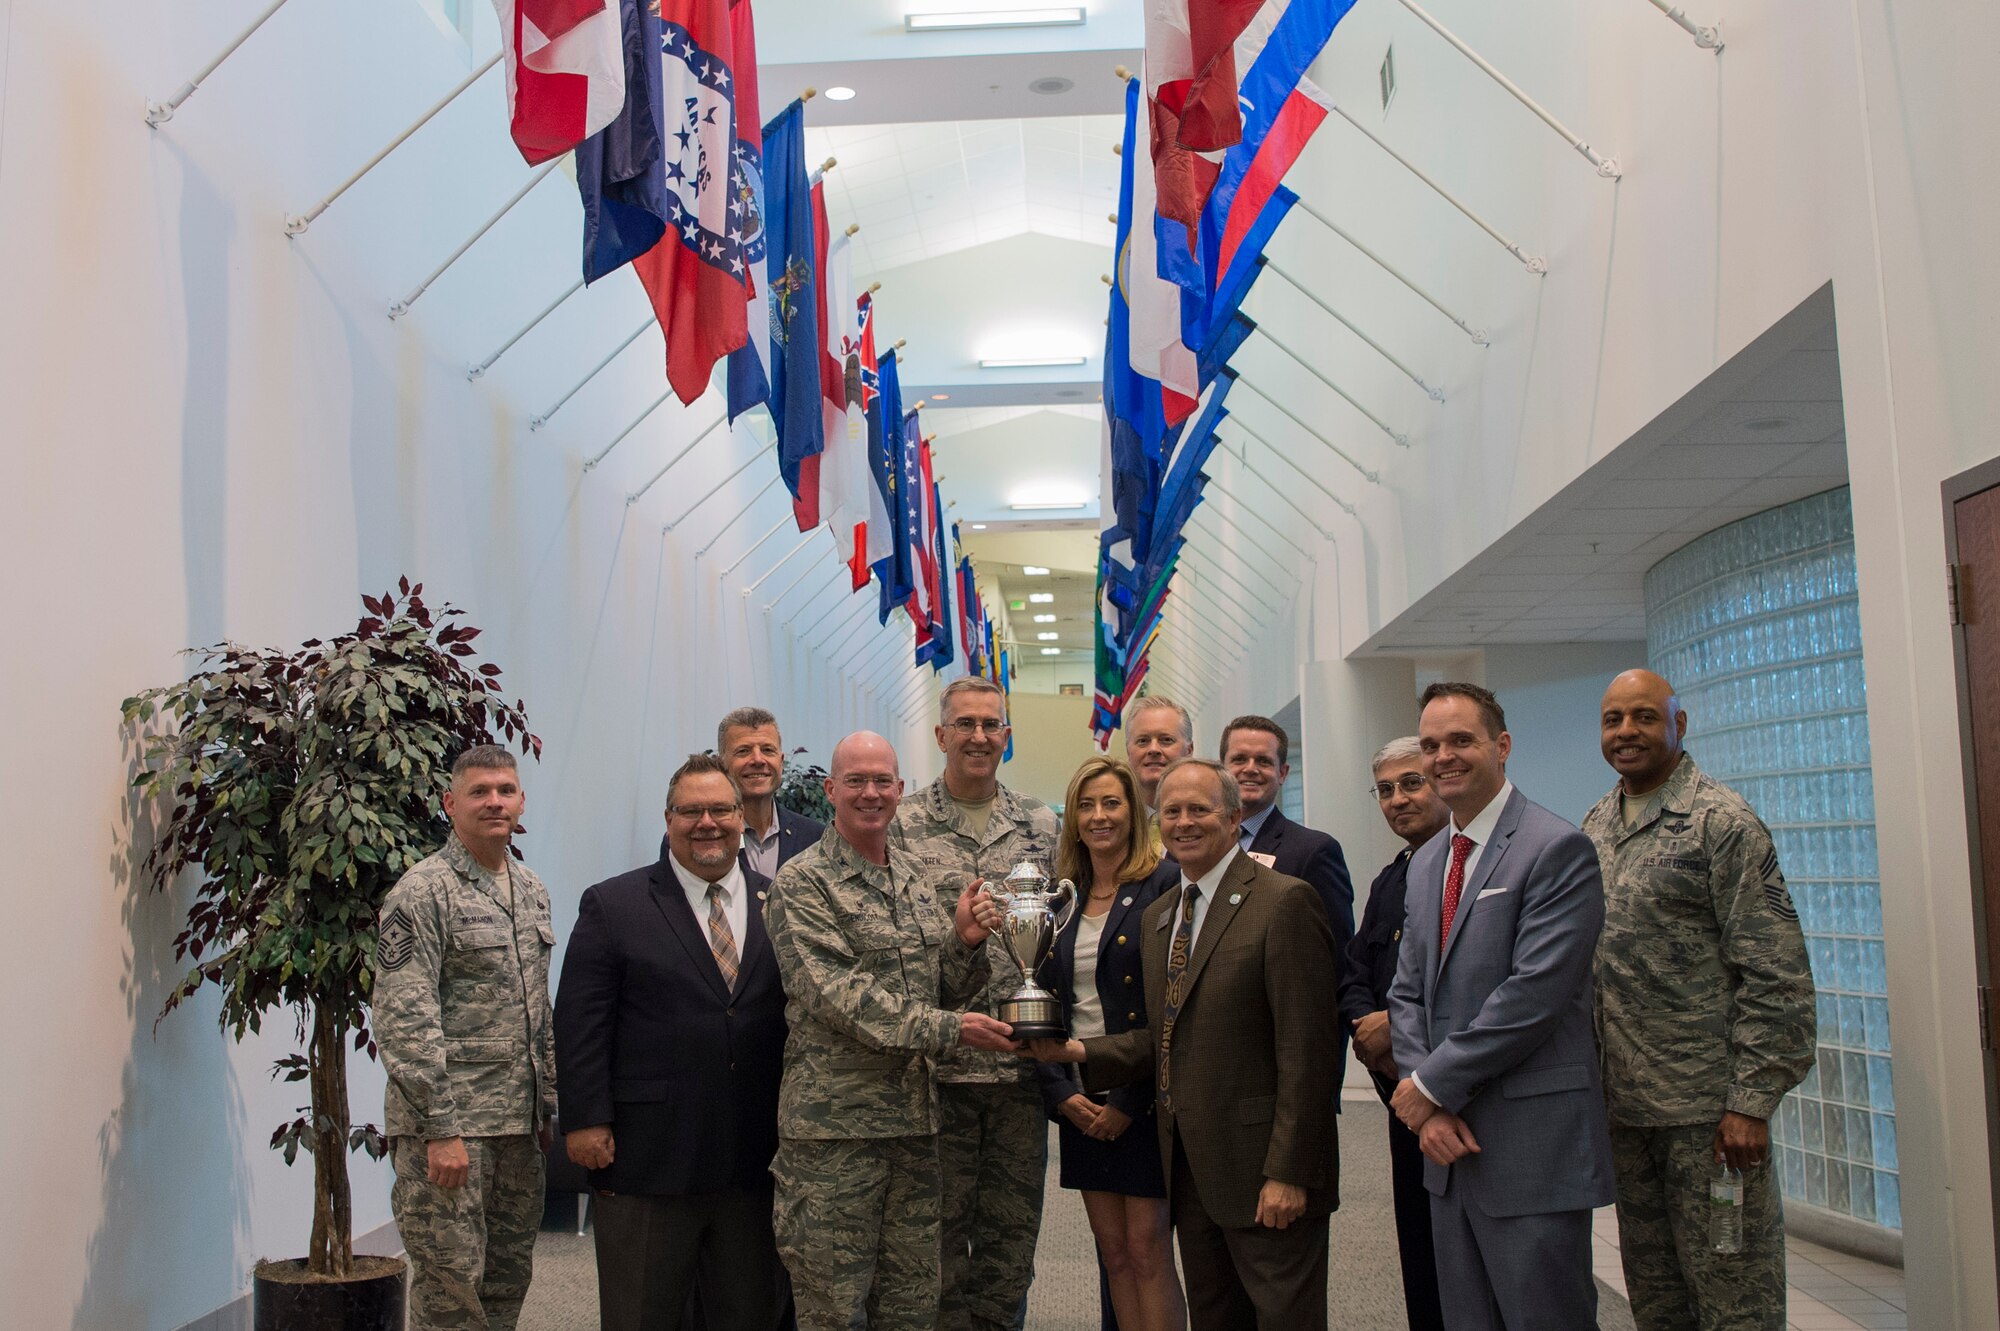 This trophy highlights the success of Team Buckley, which would not be possible without the support of local community leaders. (U.S. Air Force photo by Airman 1st Class Holden S. Faul)